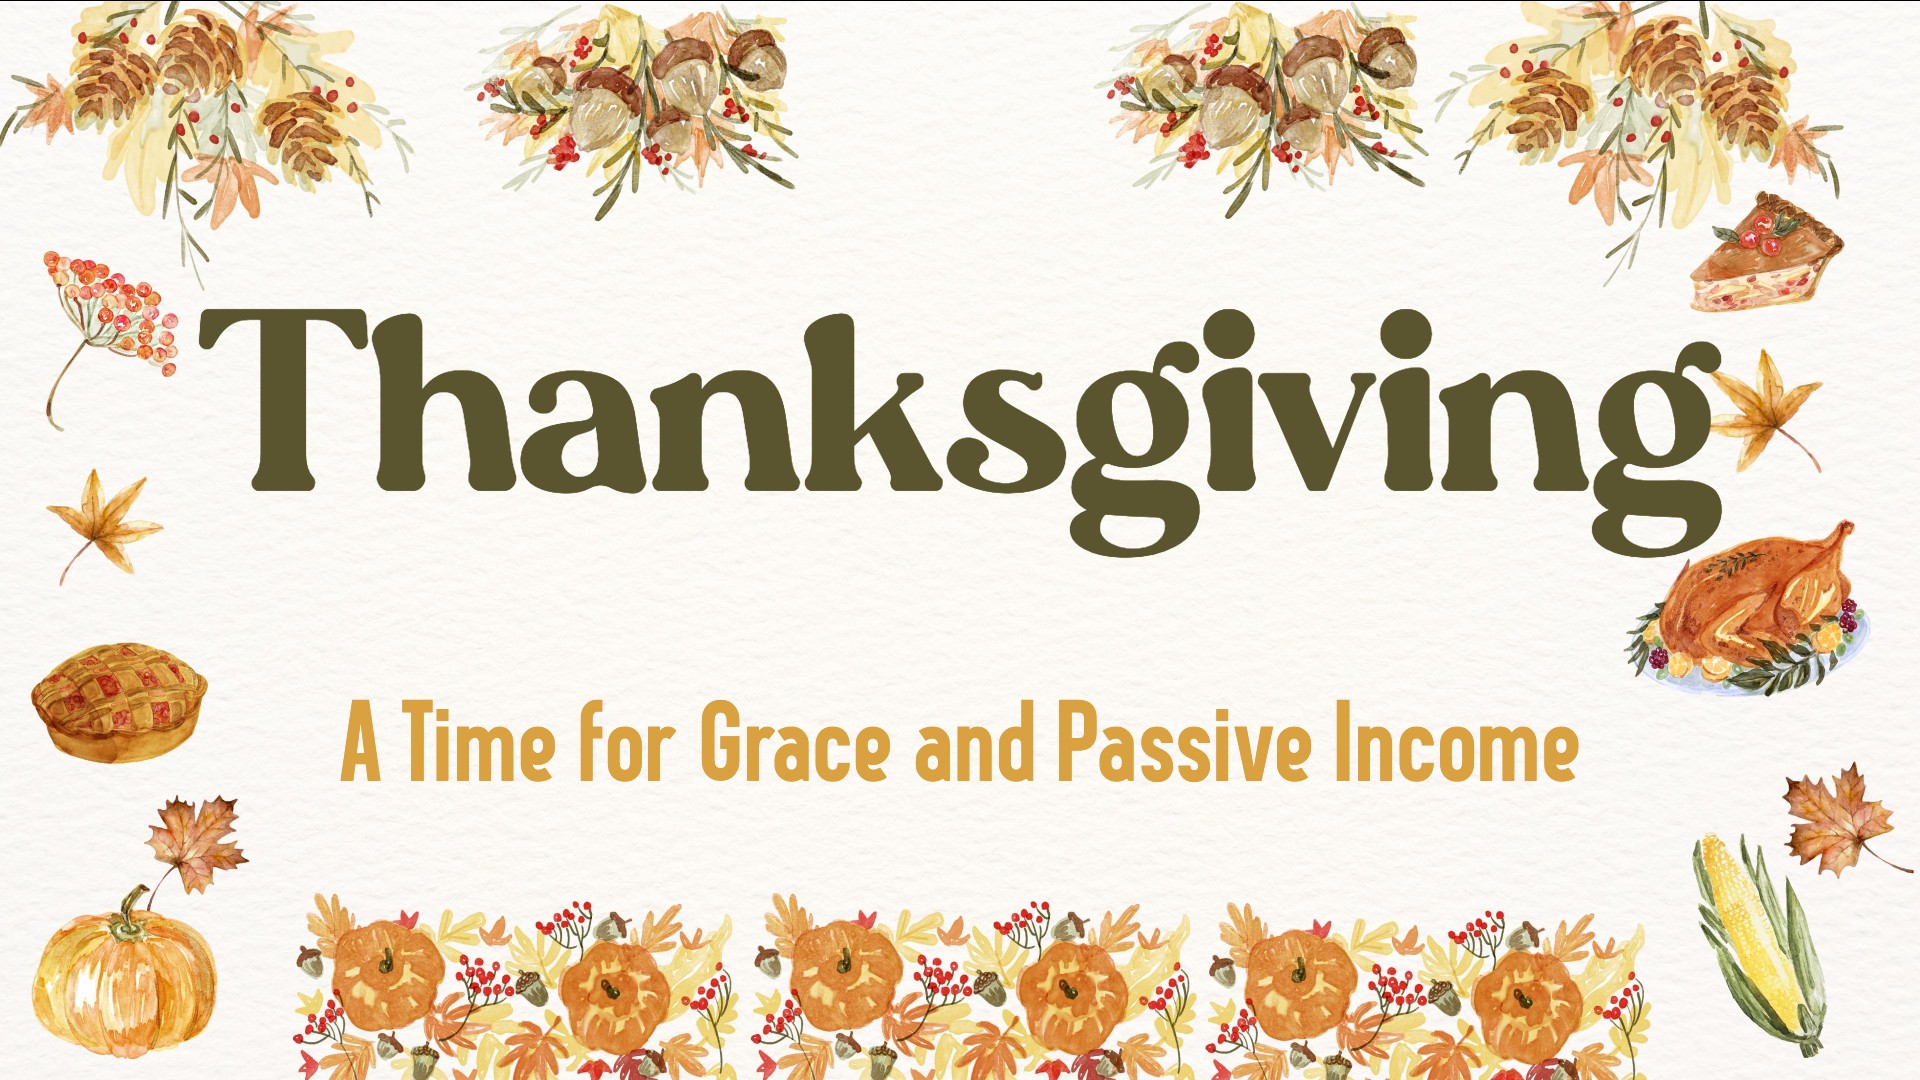 Thanksgiving: A Time for Grace and Passive Income